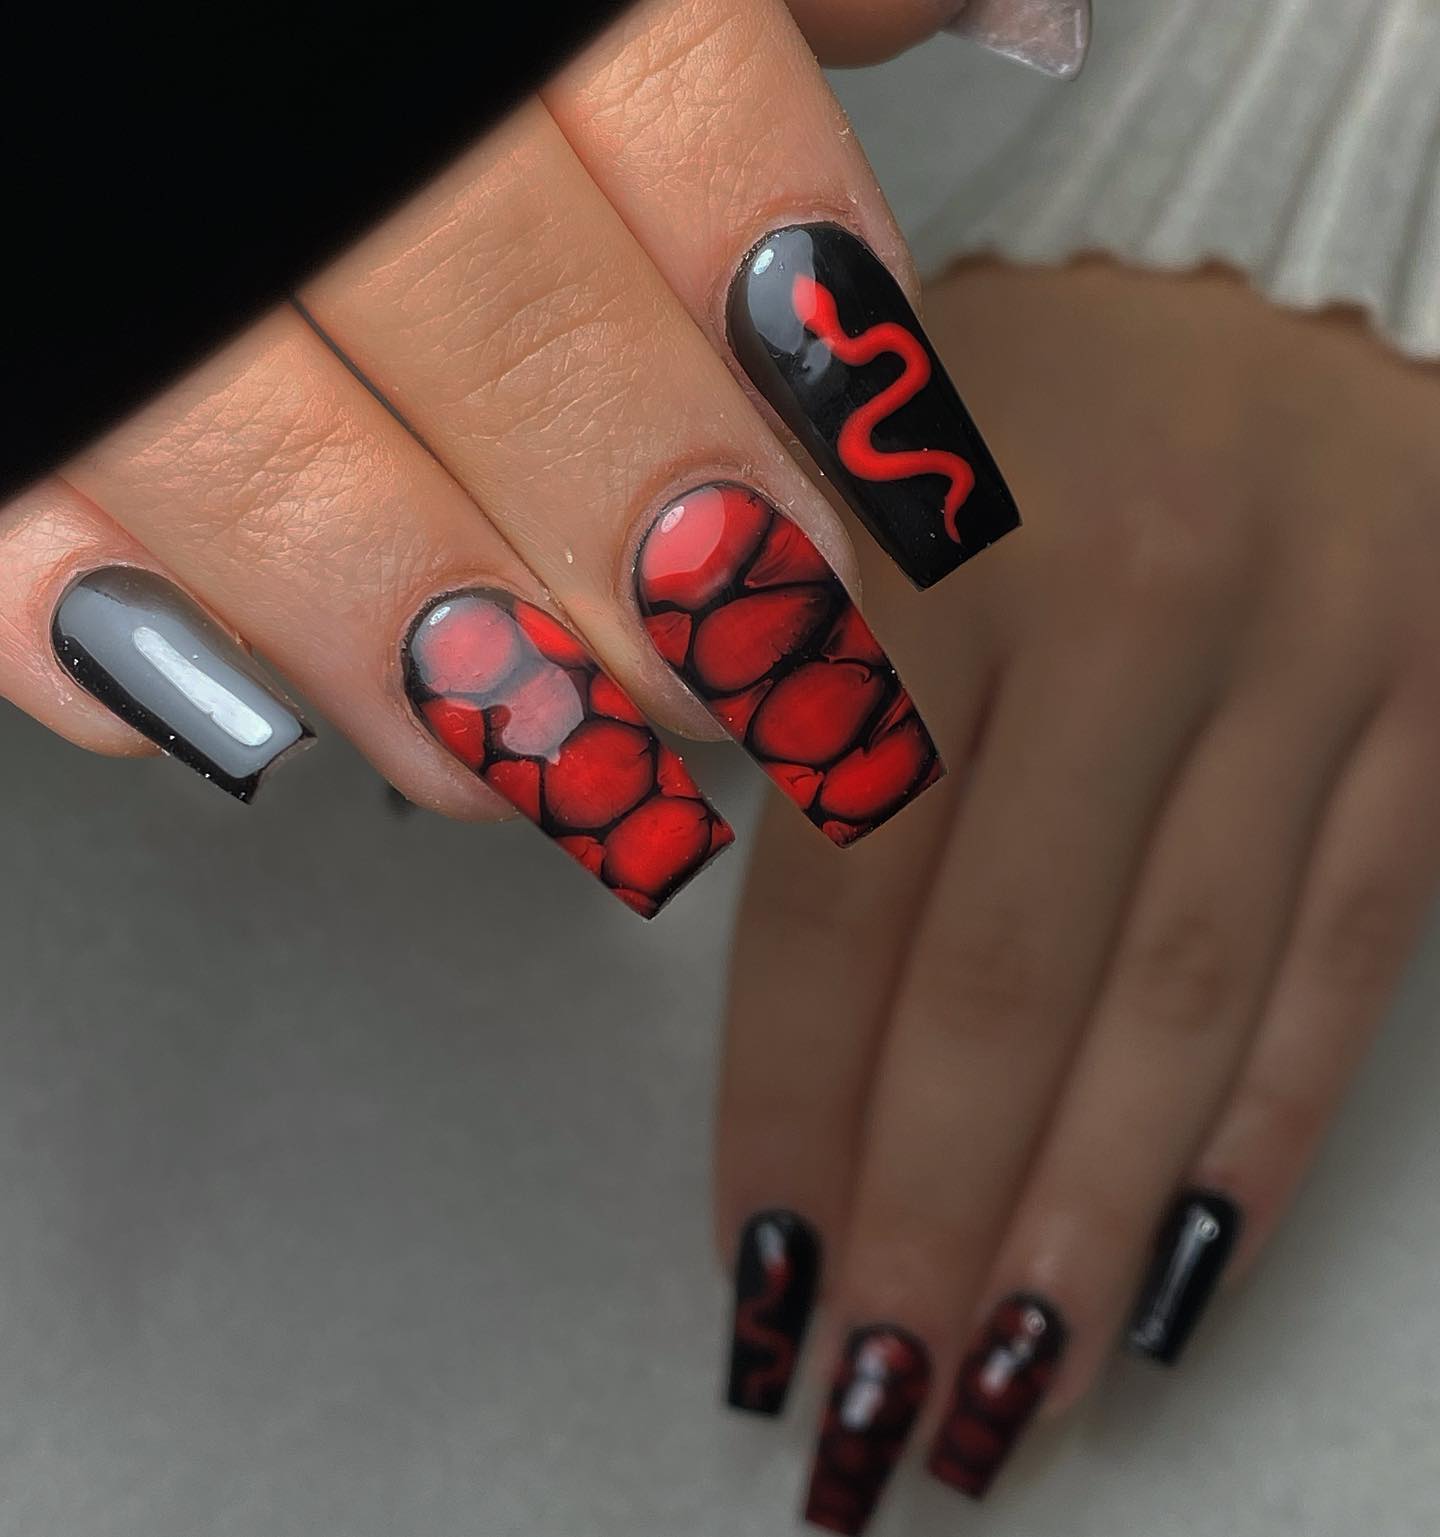 Snake is a timeless symbol and it is used in many designs just like nail ones. When you add this symbol with a red nail polish, you will get the savage feeling to the fullest. As a nice detail, snake skin is used.